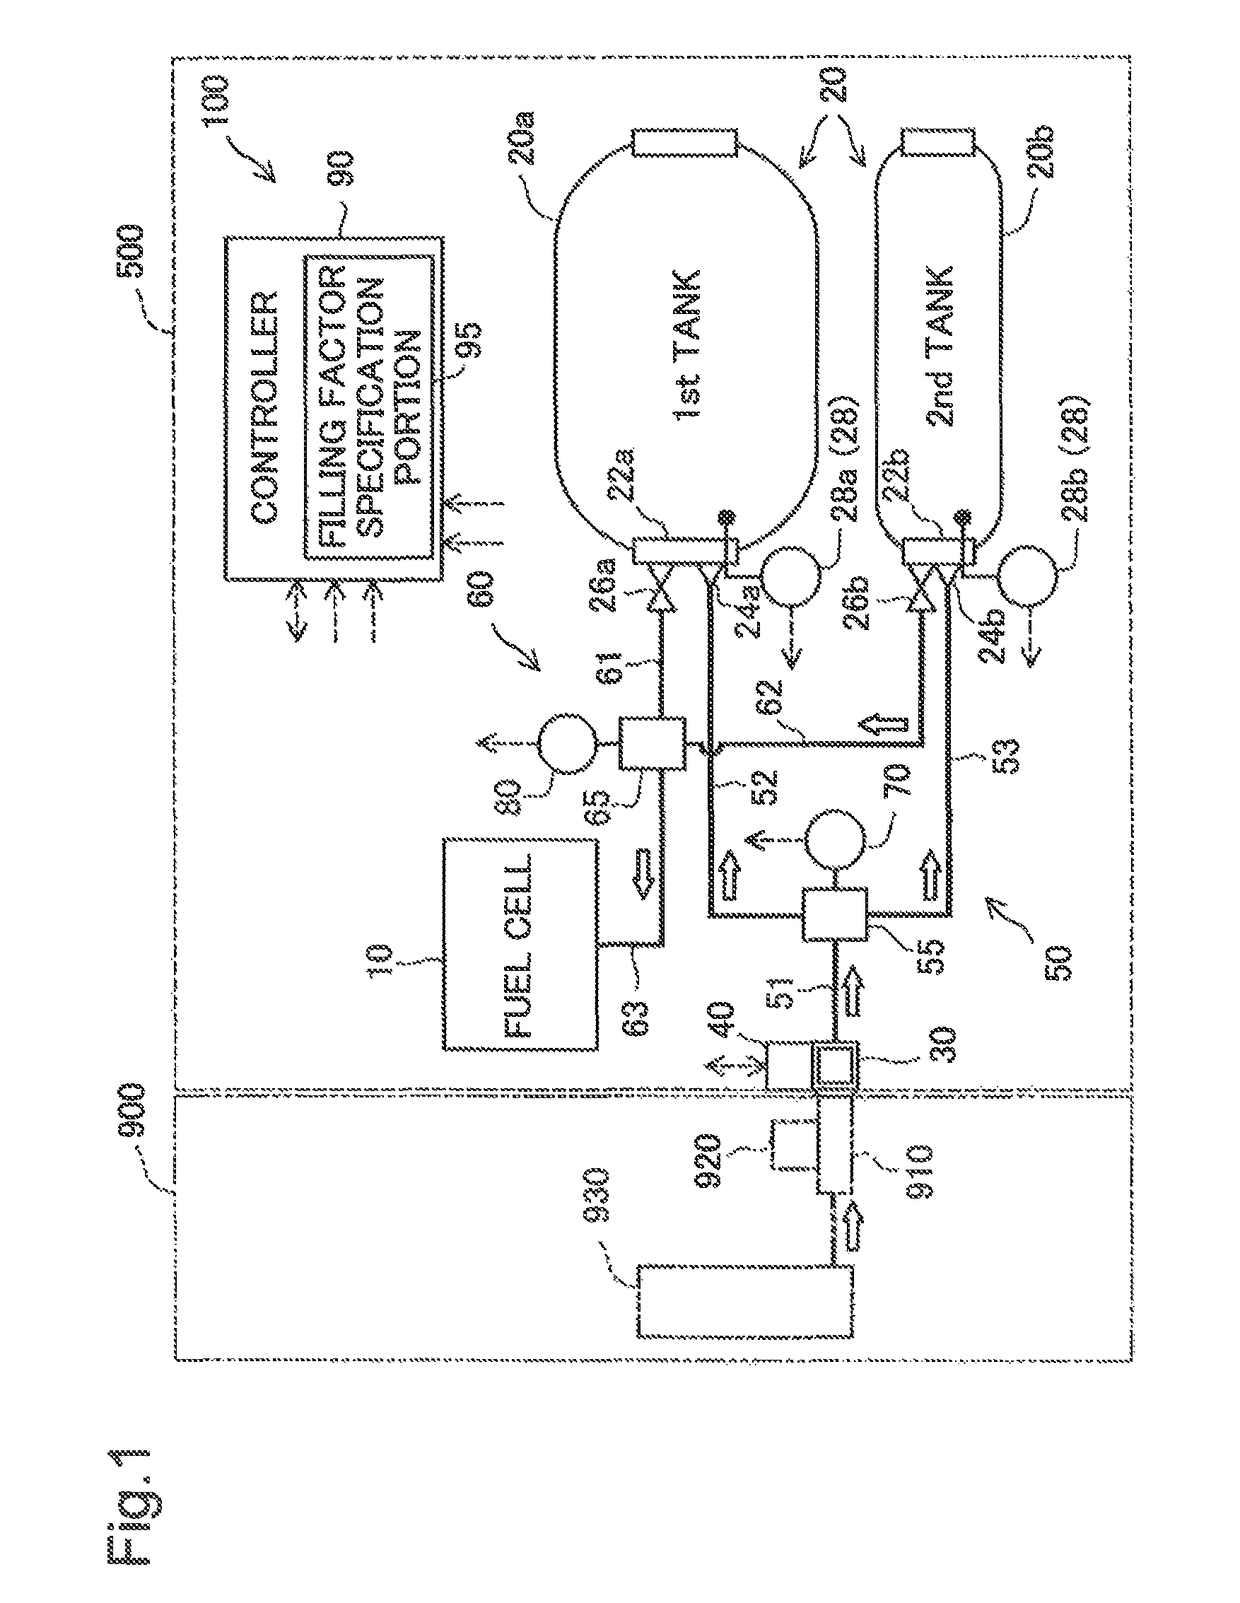 Fuel cell system and a method for controlling a fuel cell system